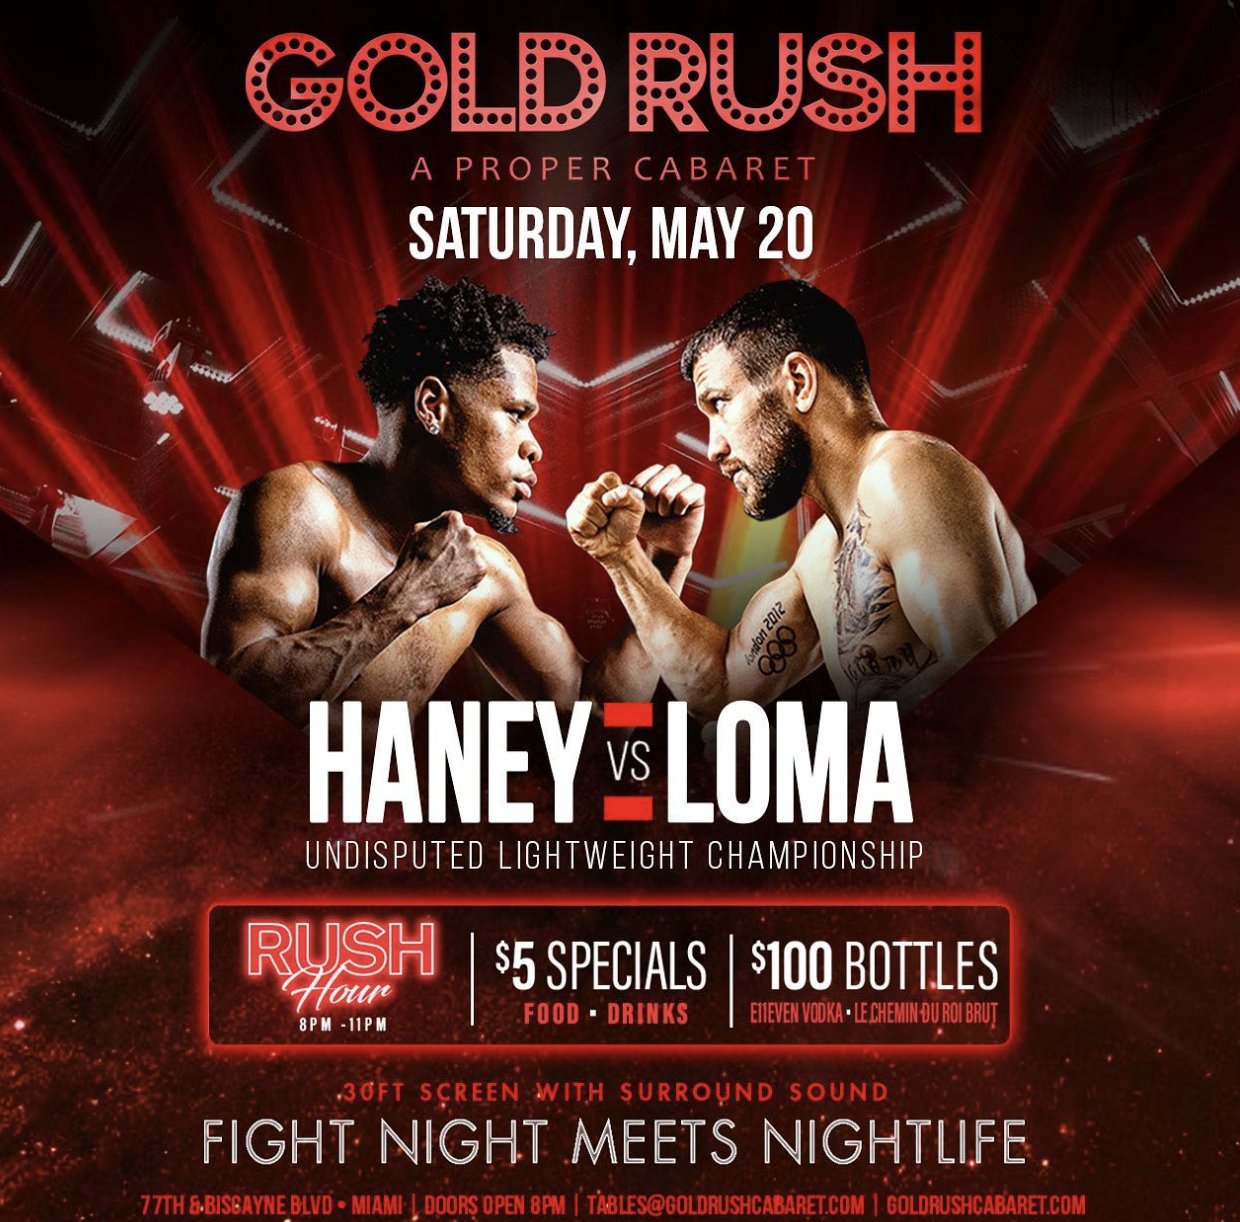 Gold Rush Cabaret on X: It's time to see who's the real champ in the ring!  #DevinHaney 🆚 #VasiliyLomachenko are about to go head-to-head for the  undisputed lightweight title! 🏆🥊 Catch all